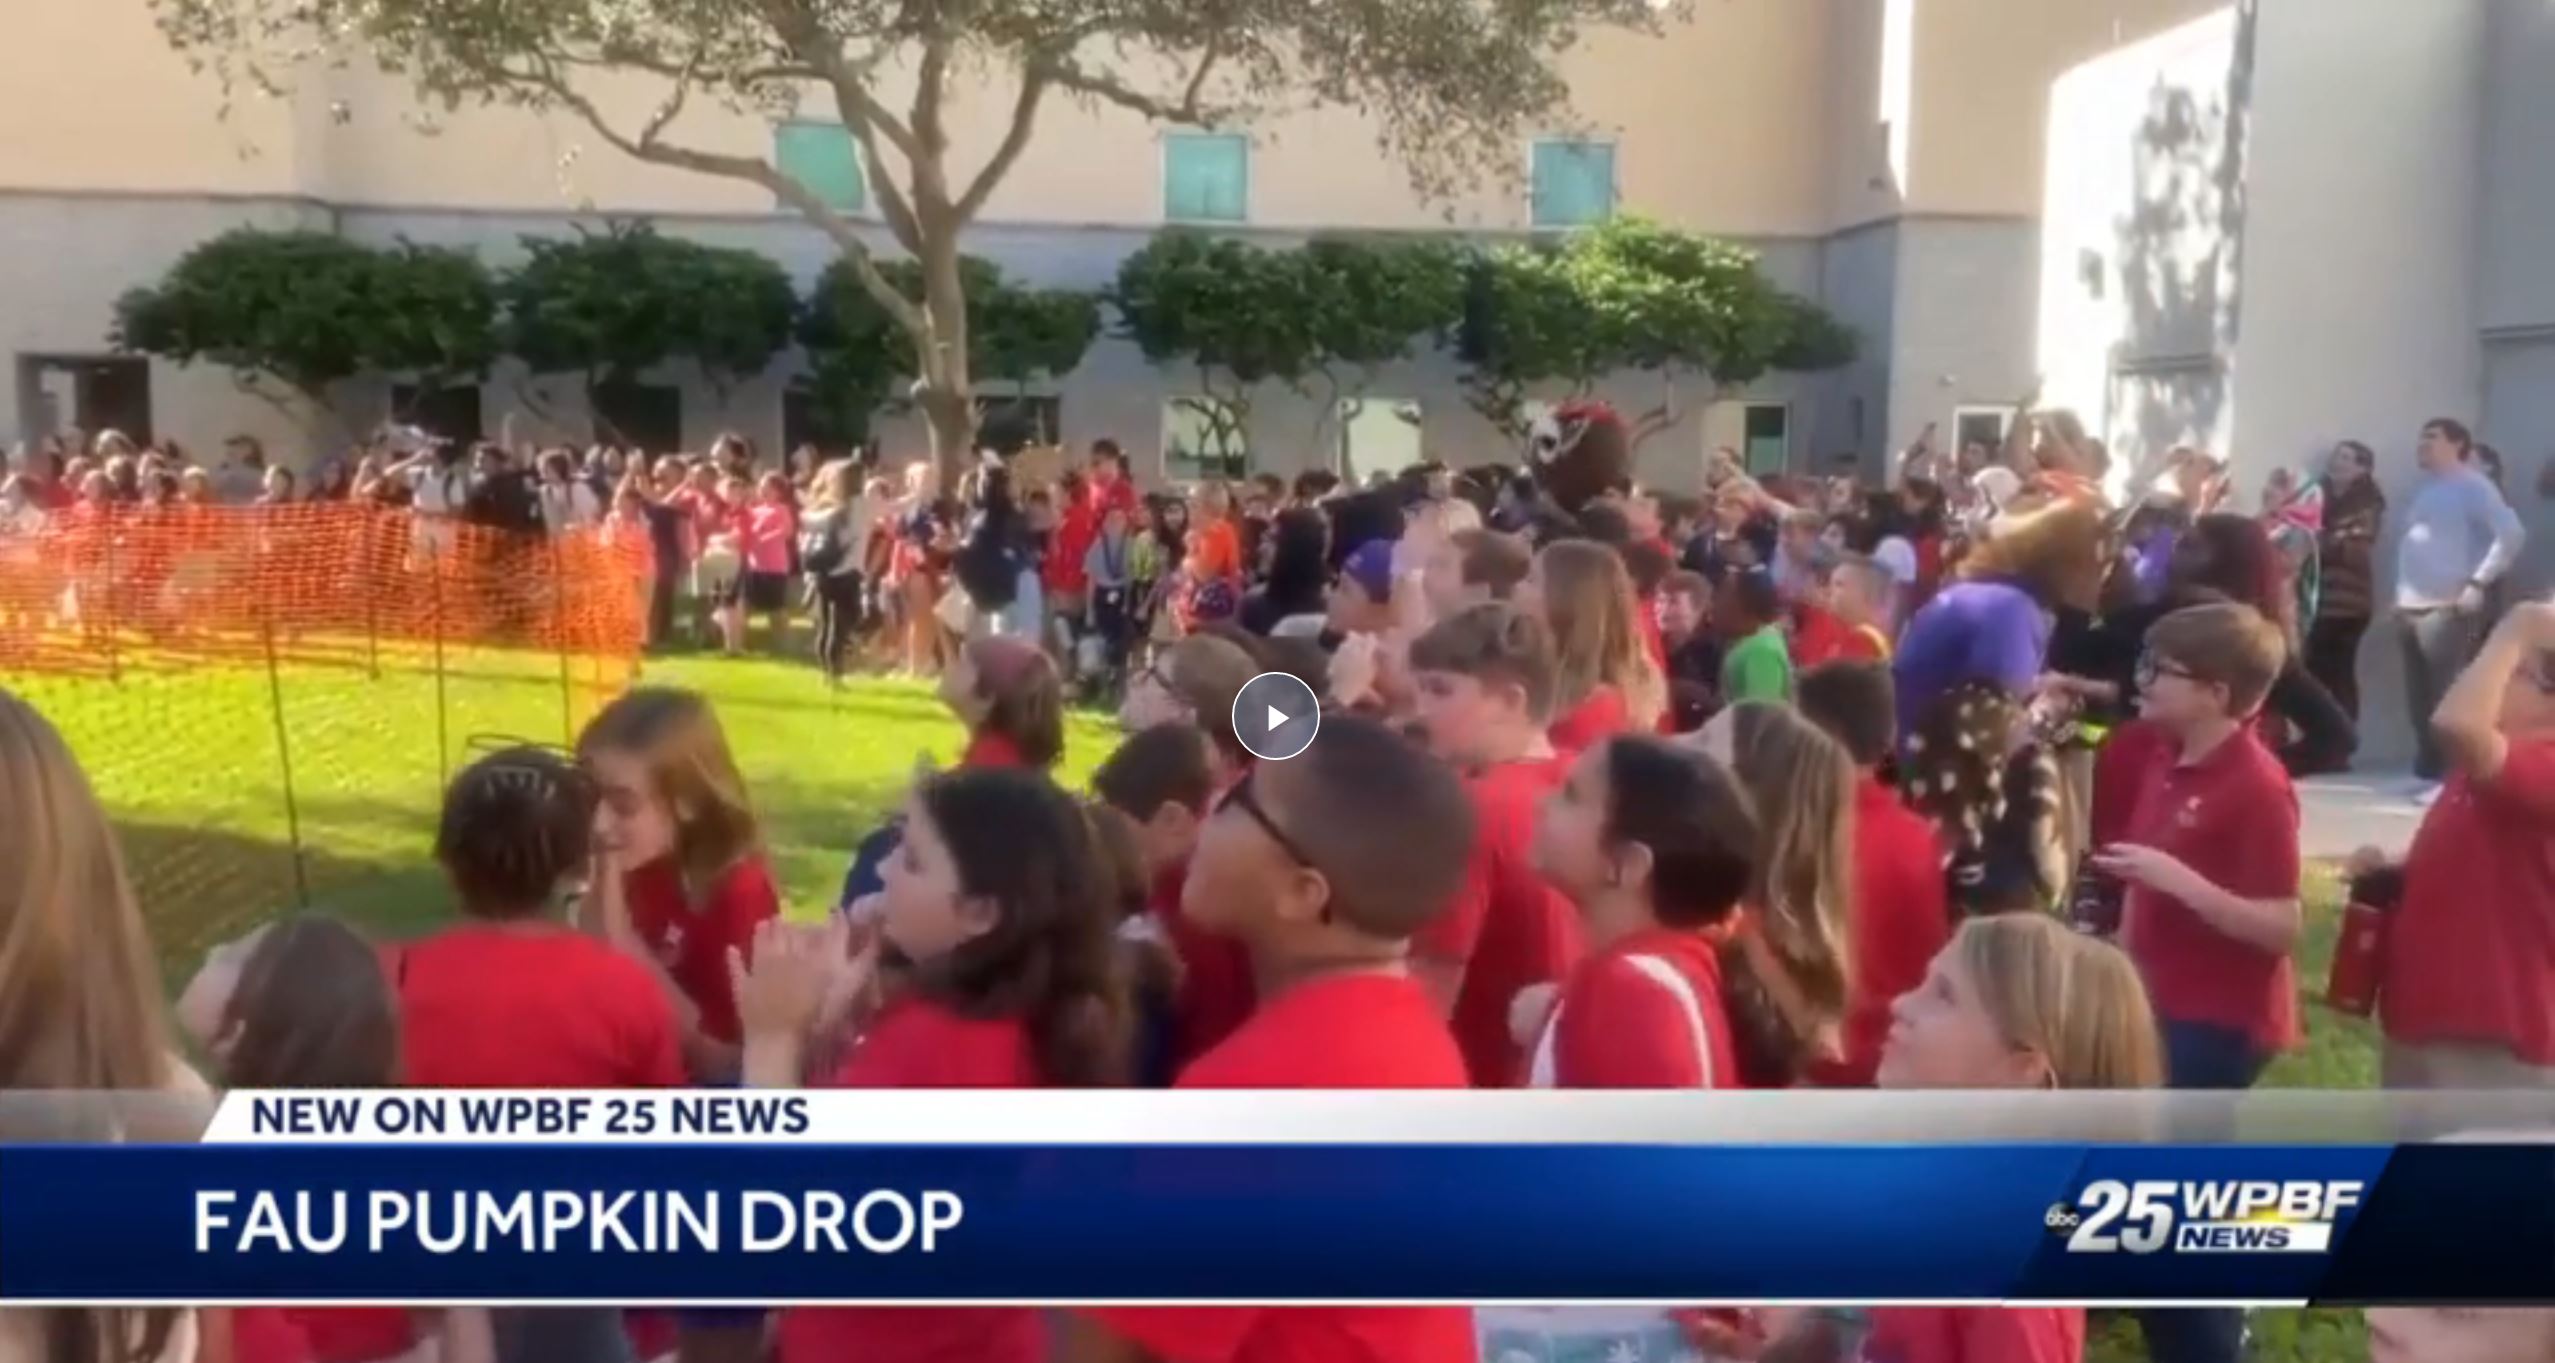 WPBF 25 News: Crowd Gathers for FAU's Annual Pumpkin Drop and Physics Carnival